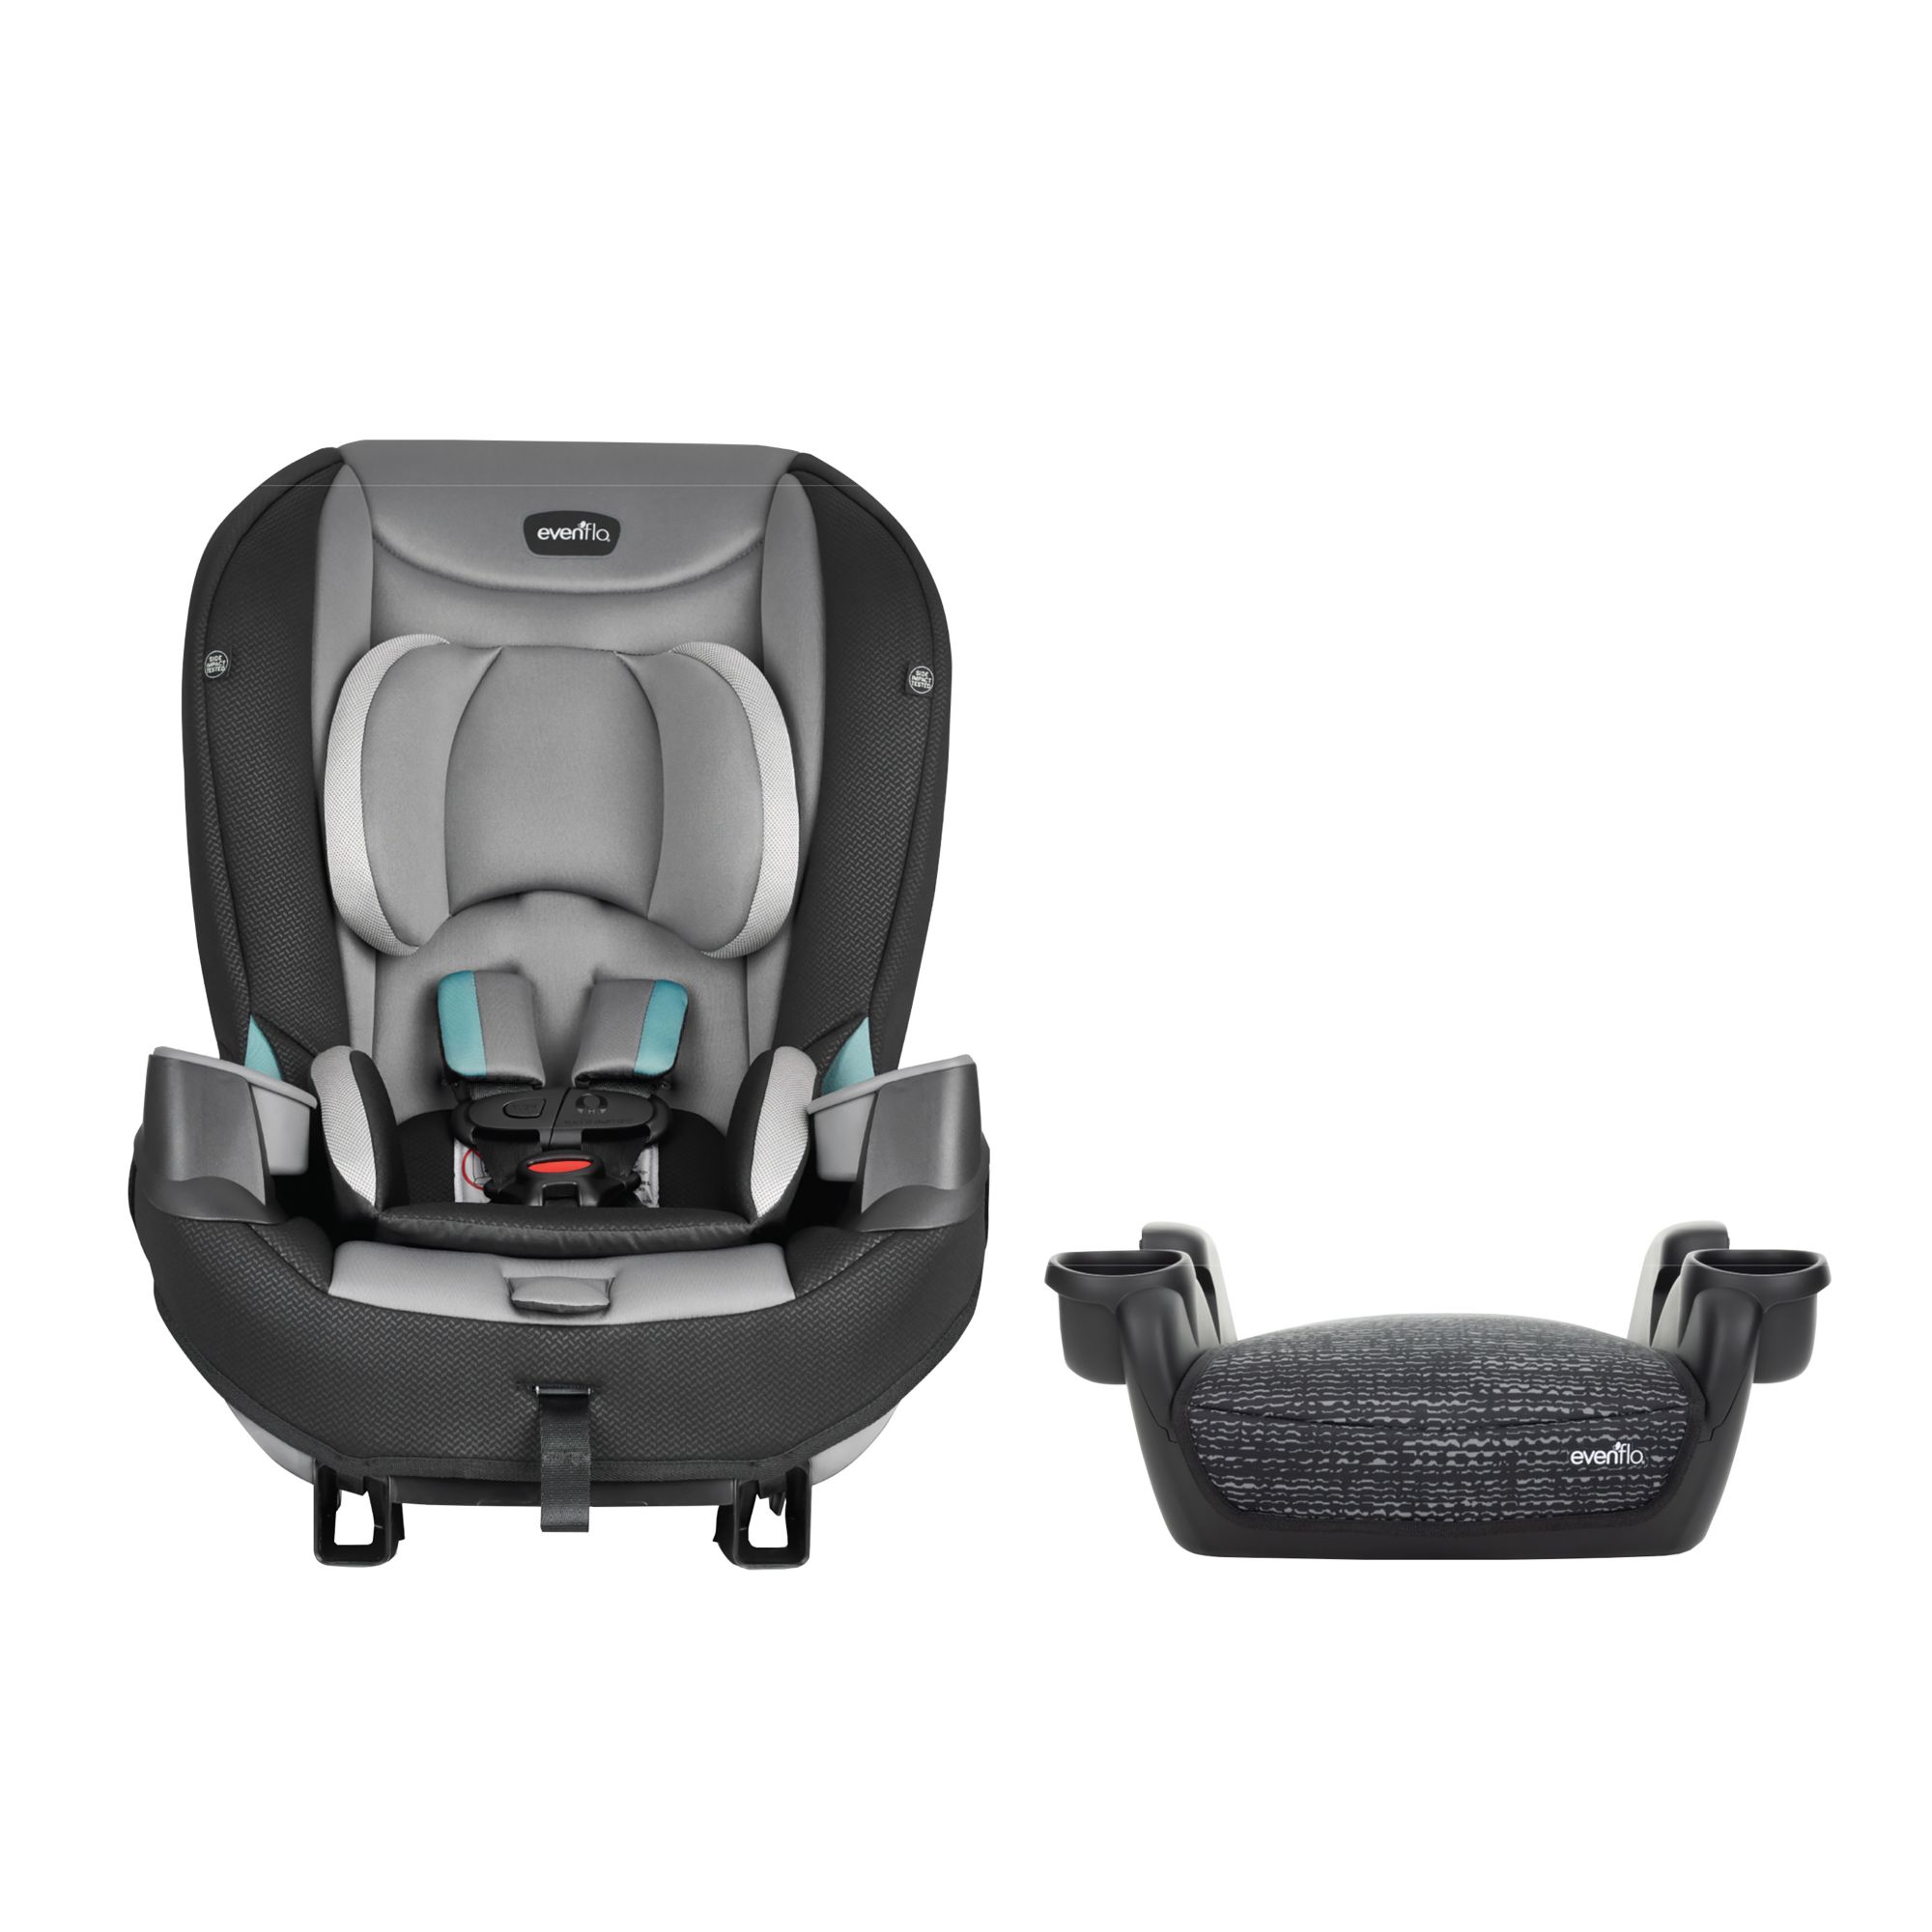 Evenflo Go Time No Back Booster Car Seat